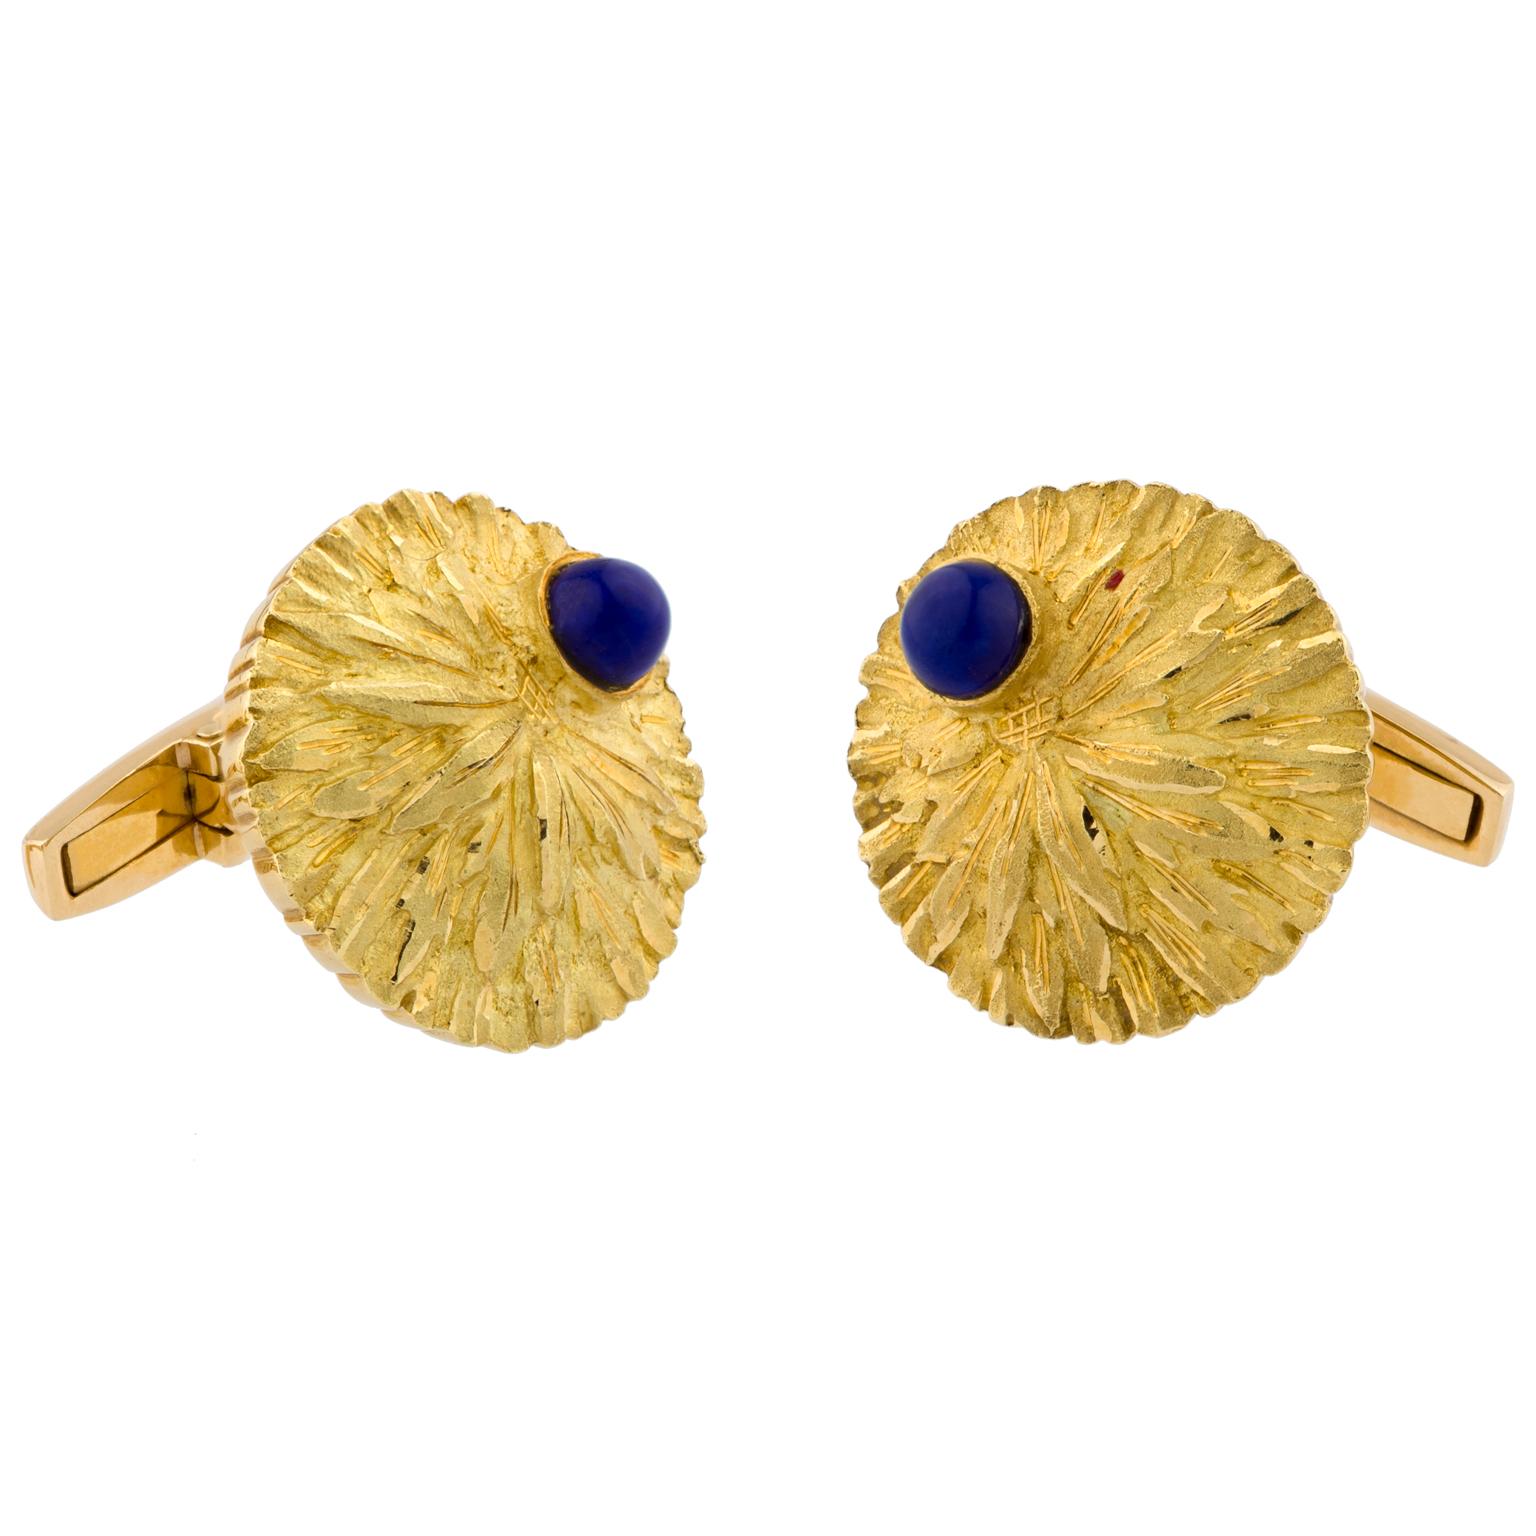 Gold and Lapis Lazuli Cufflinks In Excellent Condition For Sale In Madrid, ES